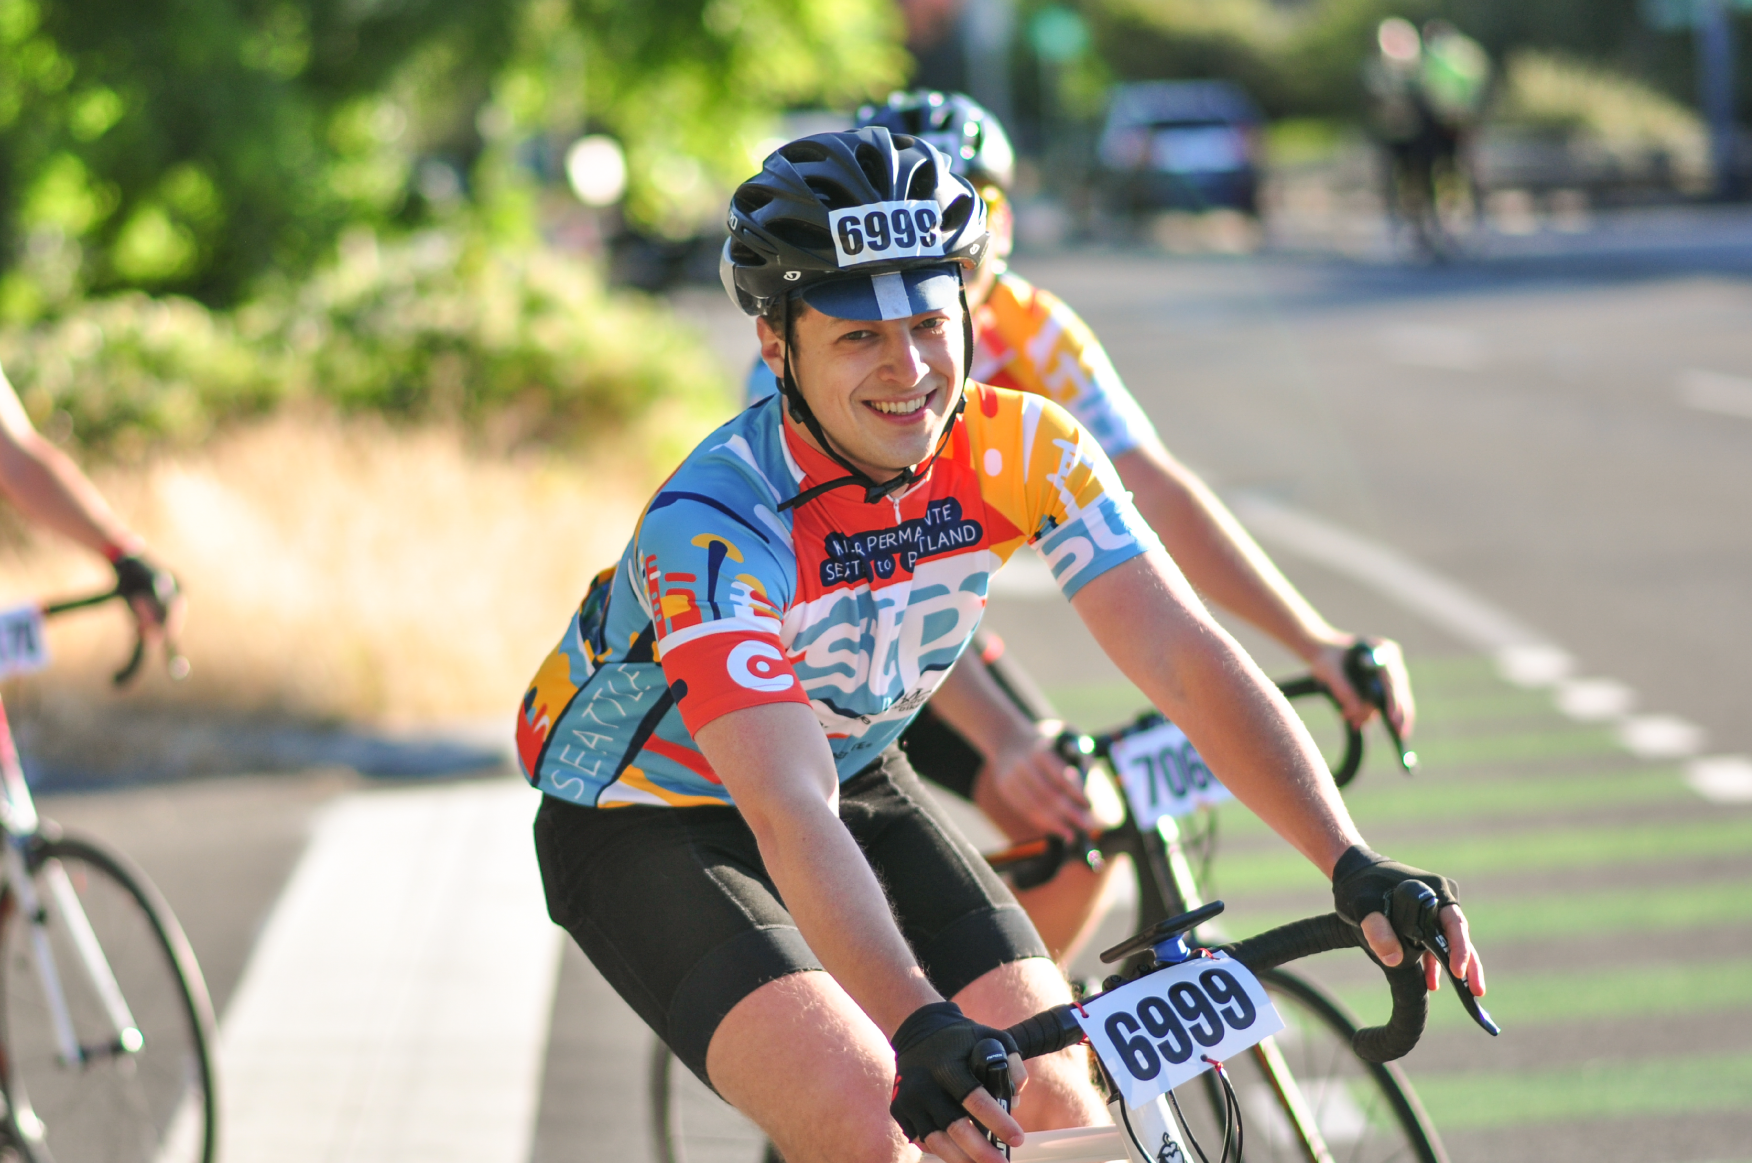 Seattle to Portland Bicycle Classic</p> — LEVI HASTINGS